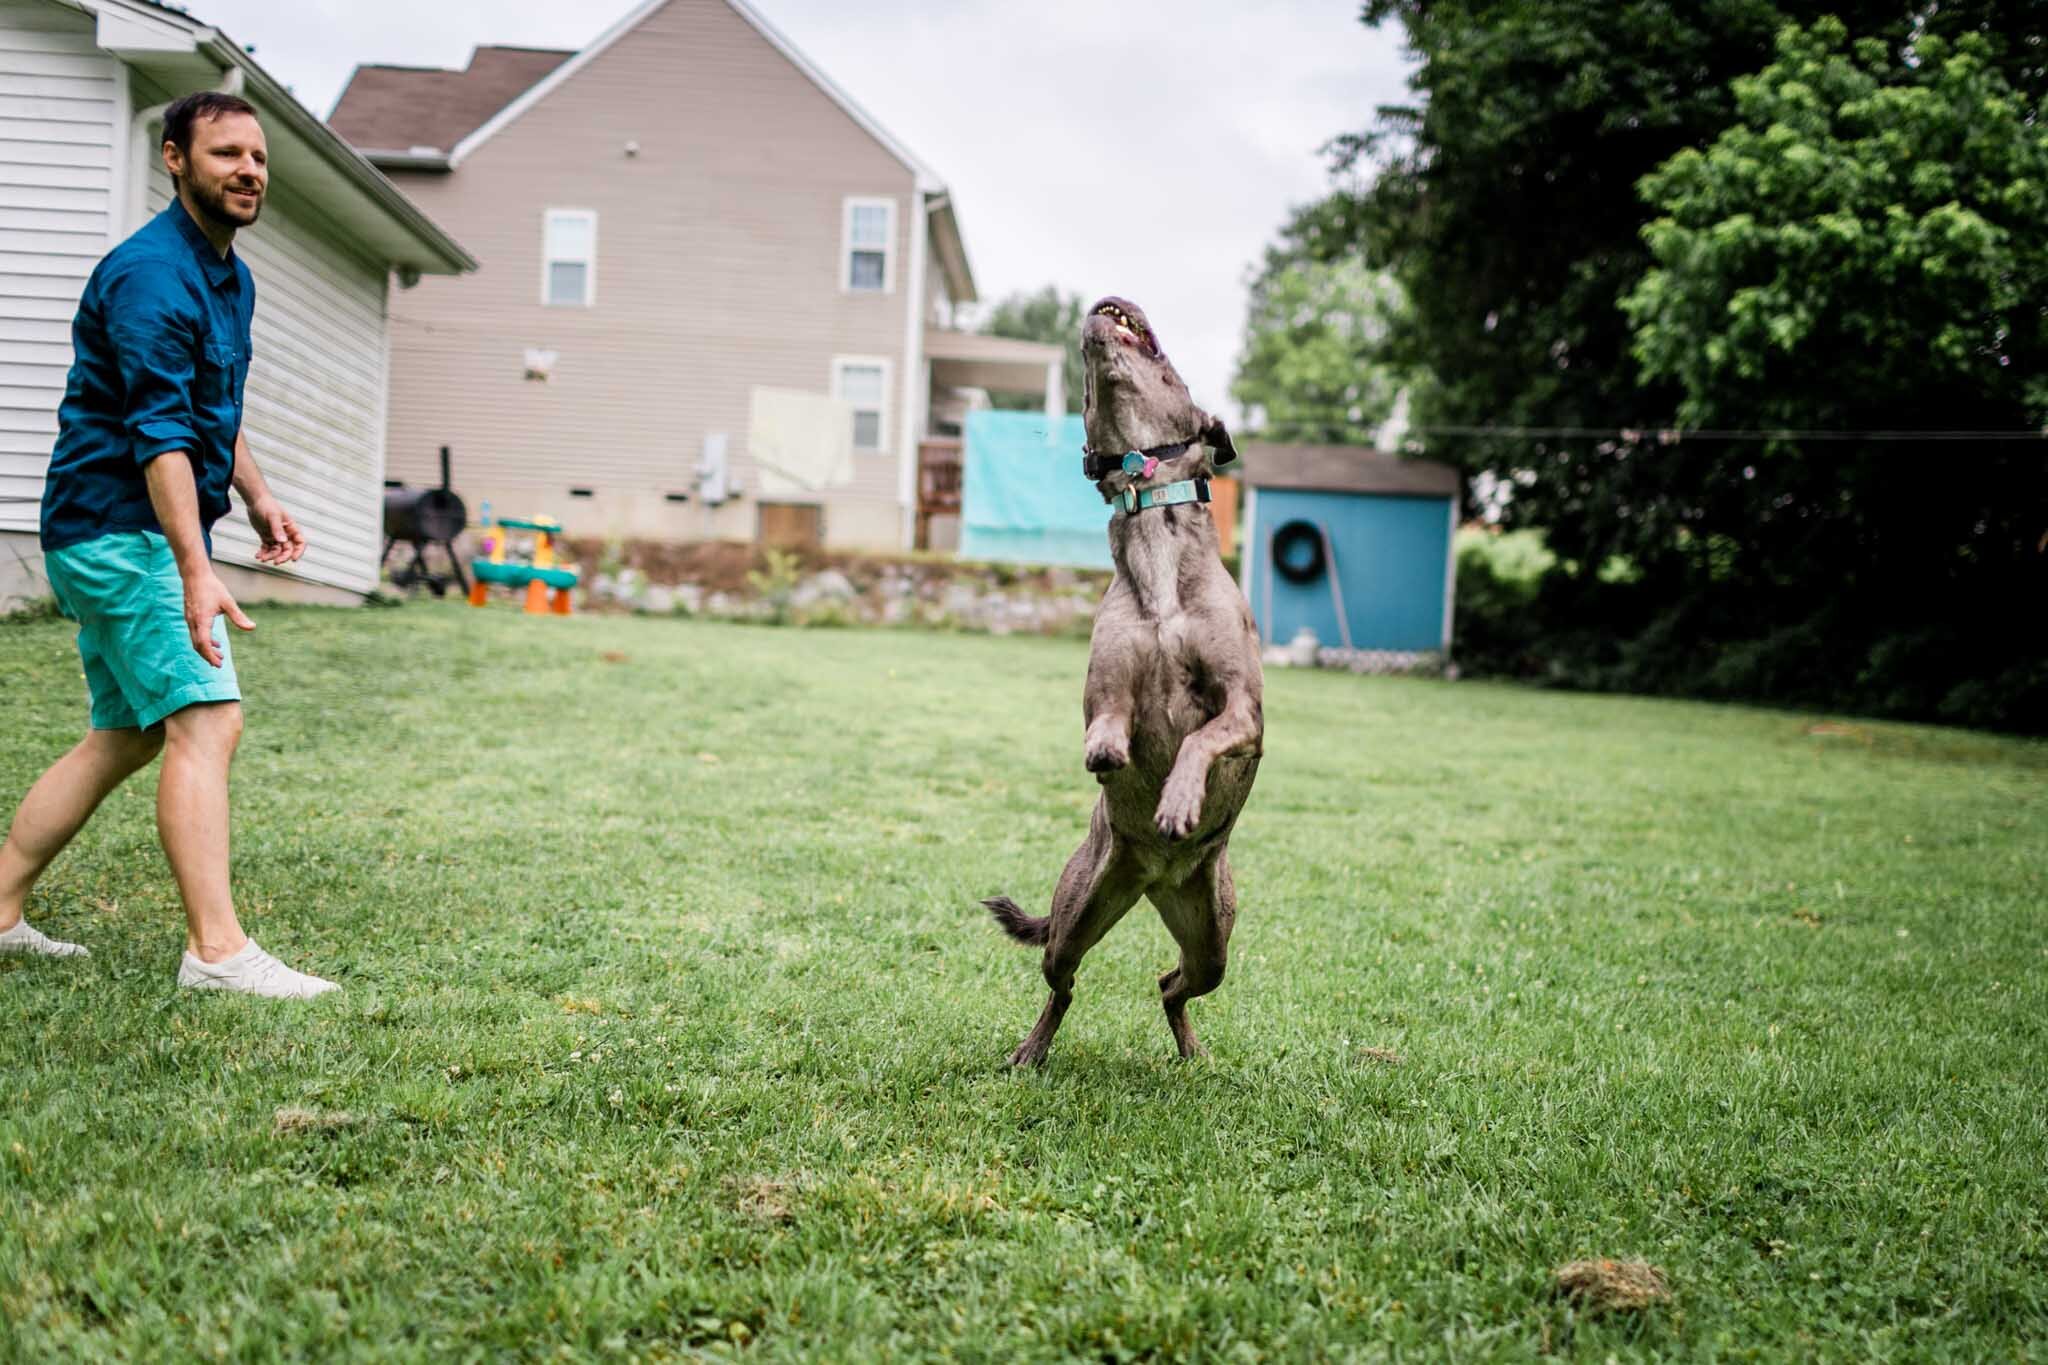 Raleigh Family Photographer | By G. Lin Photography | Dog catching ball in the air